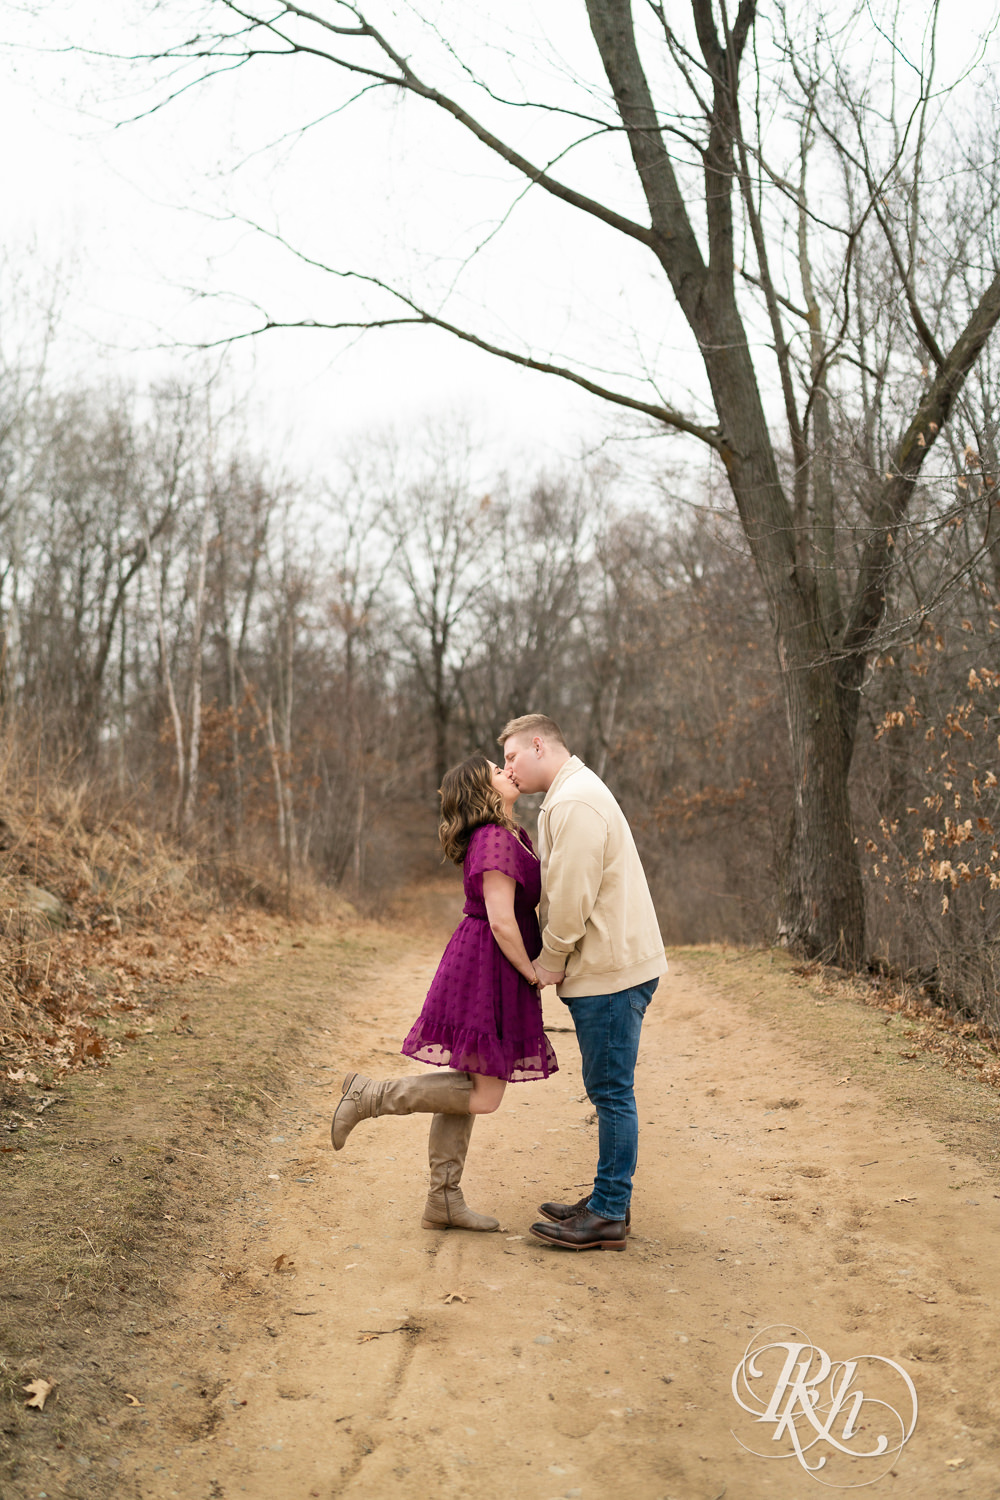 Man in jeans and woman in magenta dress kiss on a trail during March engagement photography in Eagan, Minnesota.